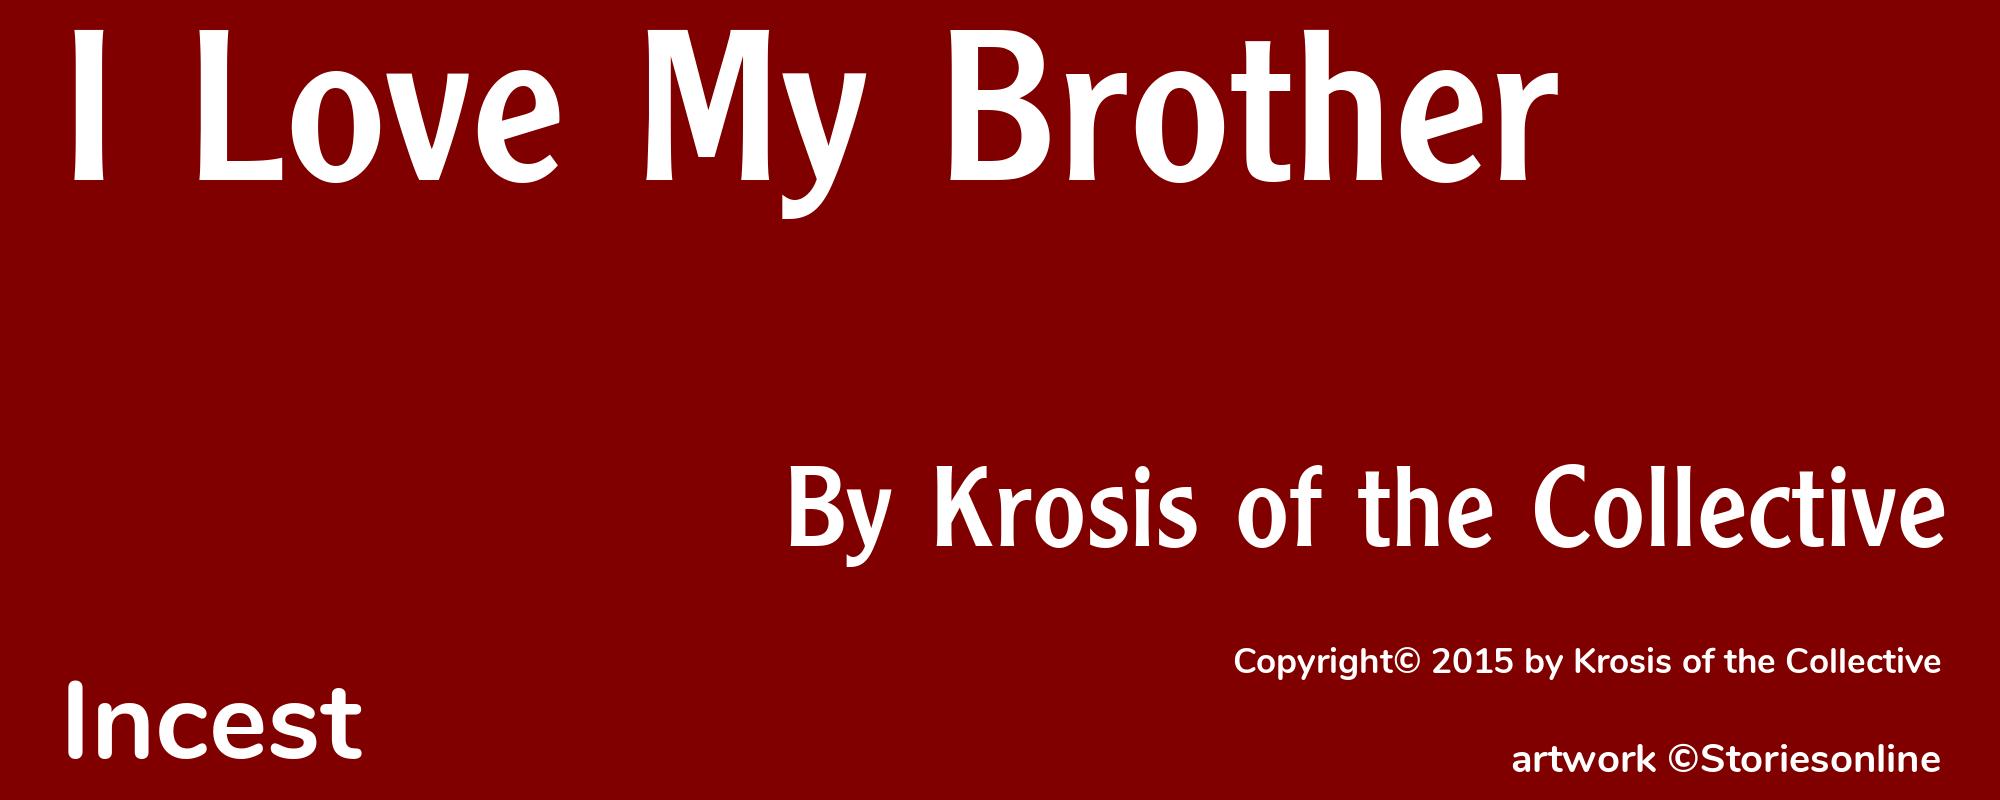 I Love My Brother - Cover